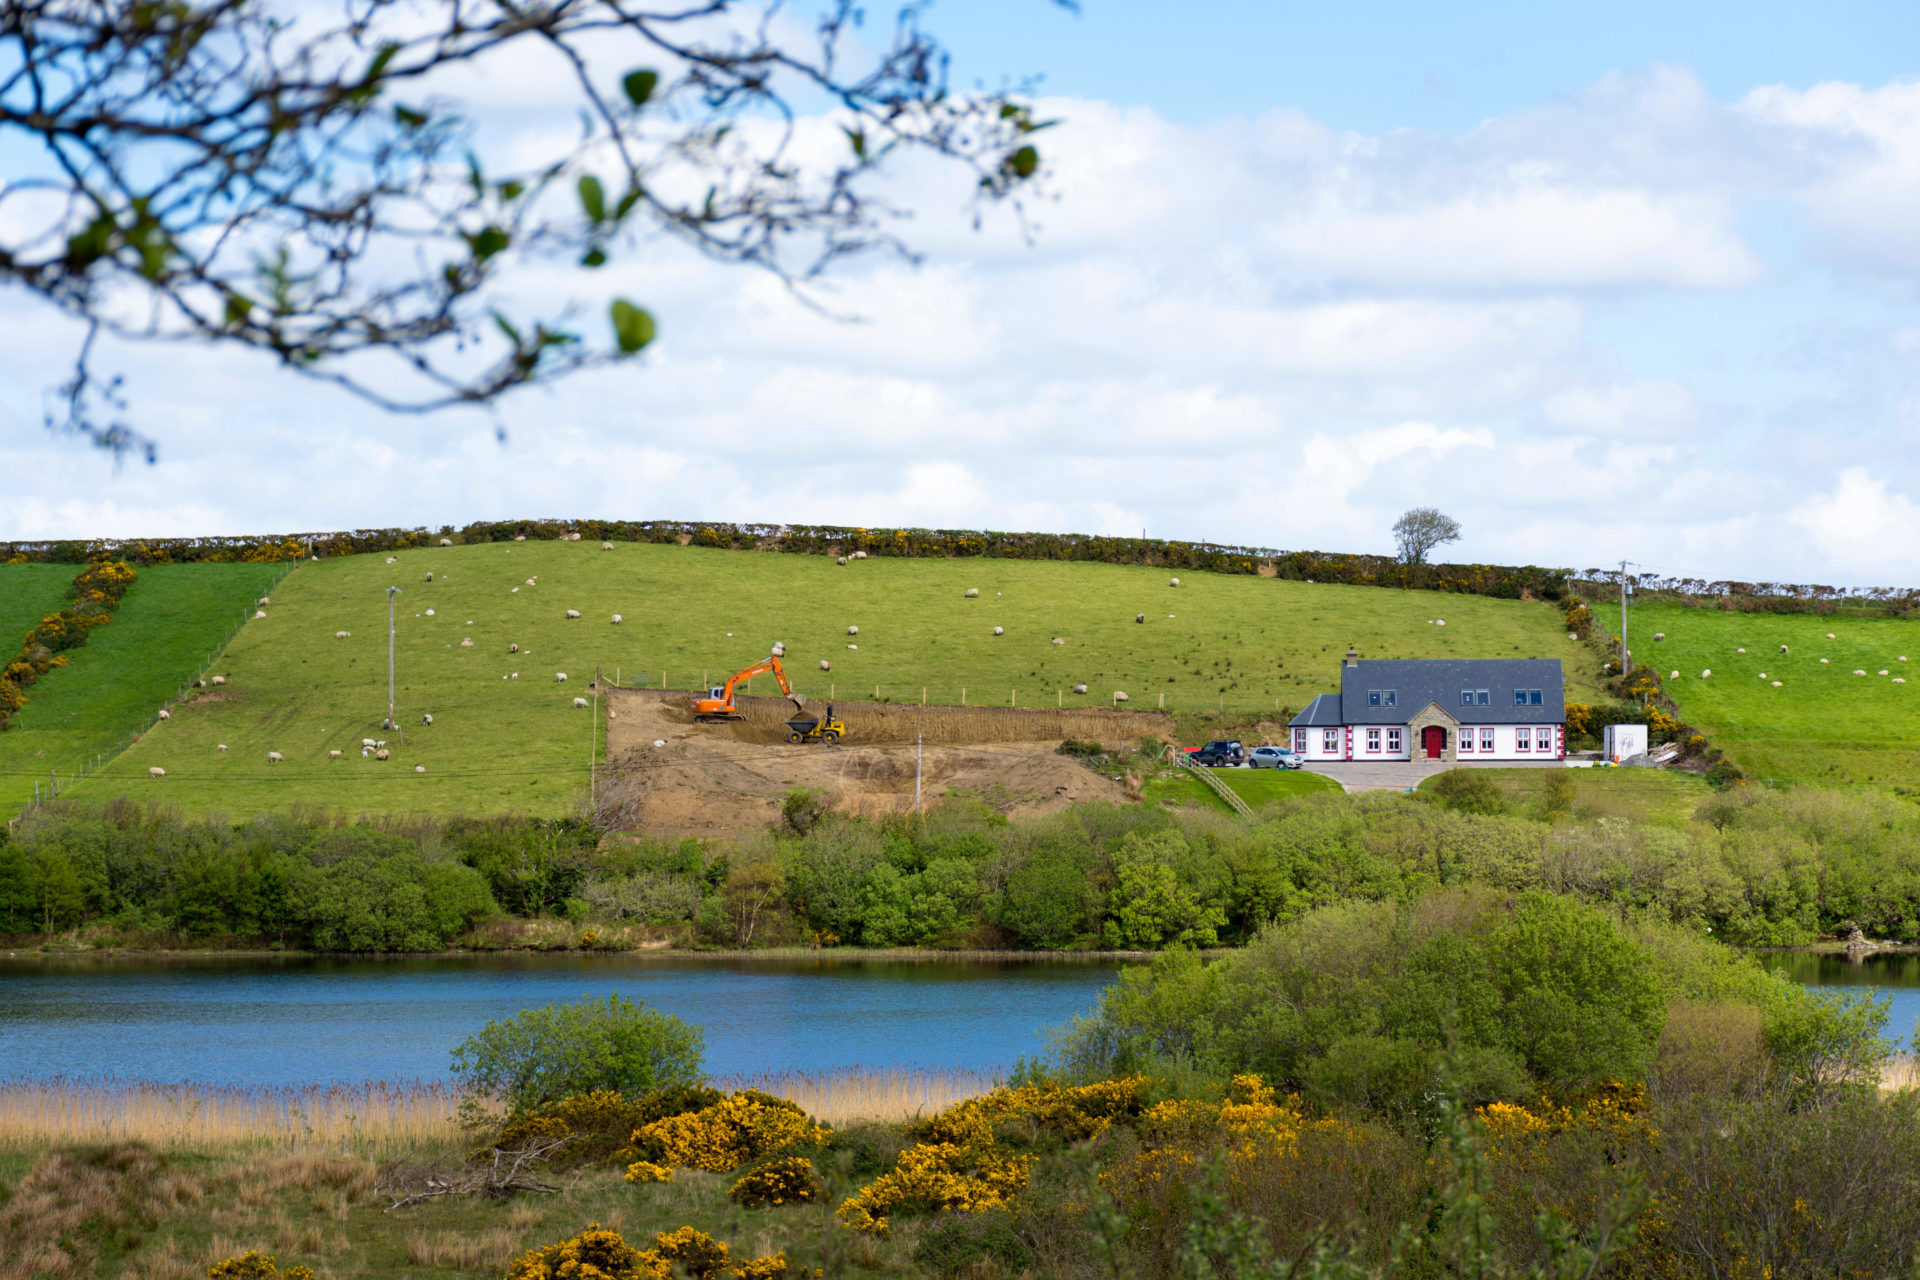 Work beginning on a new site in rural Ireland, County Donegal.